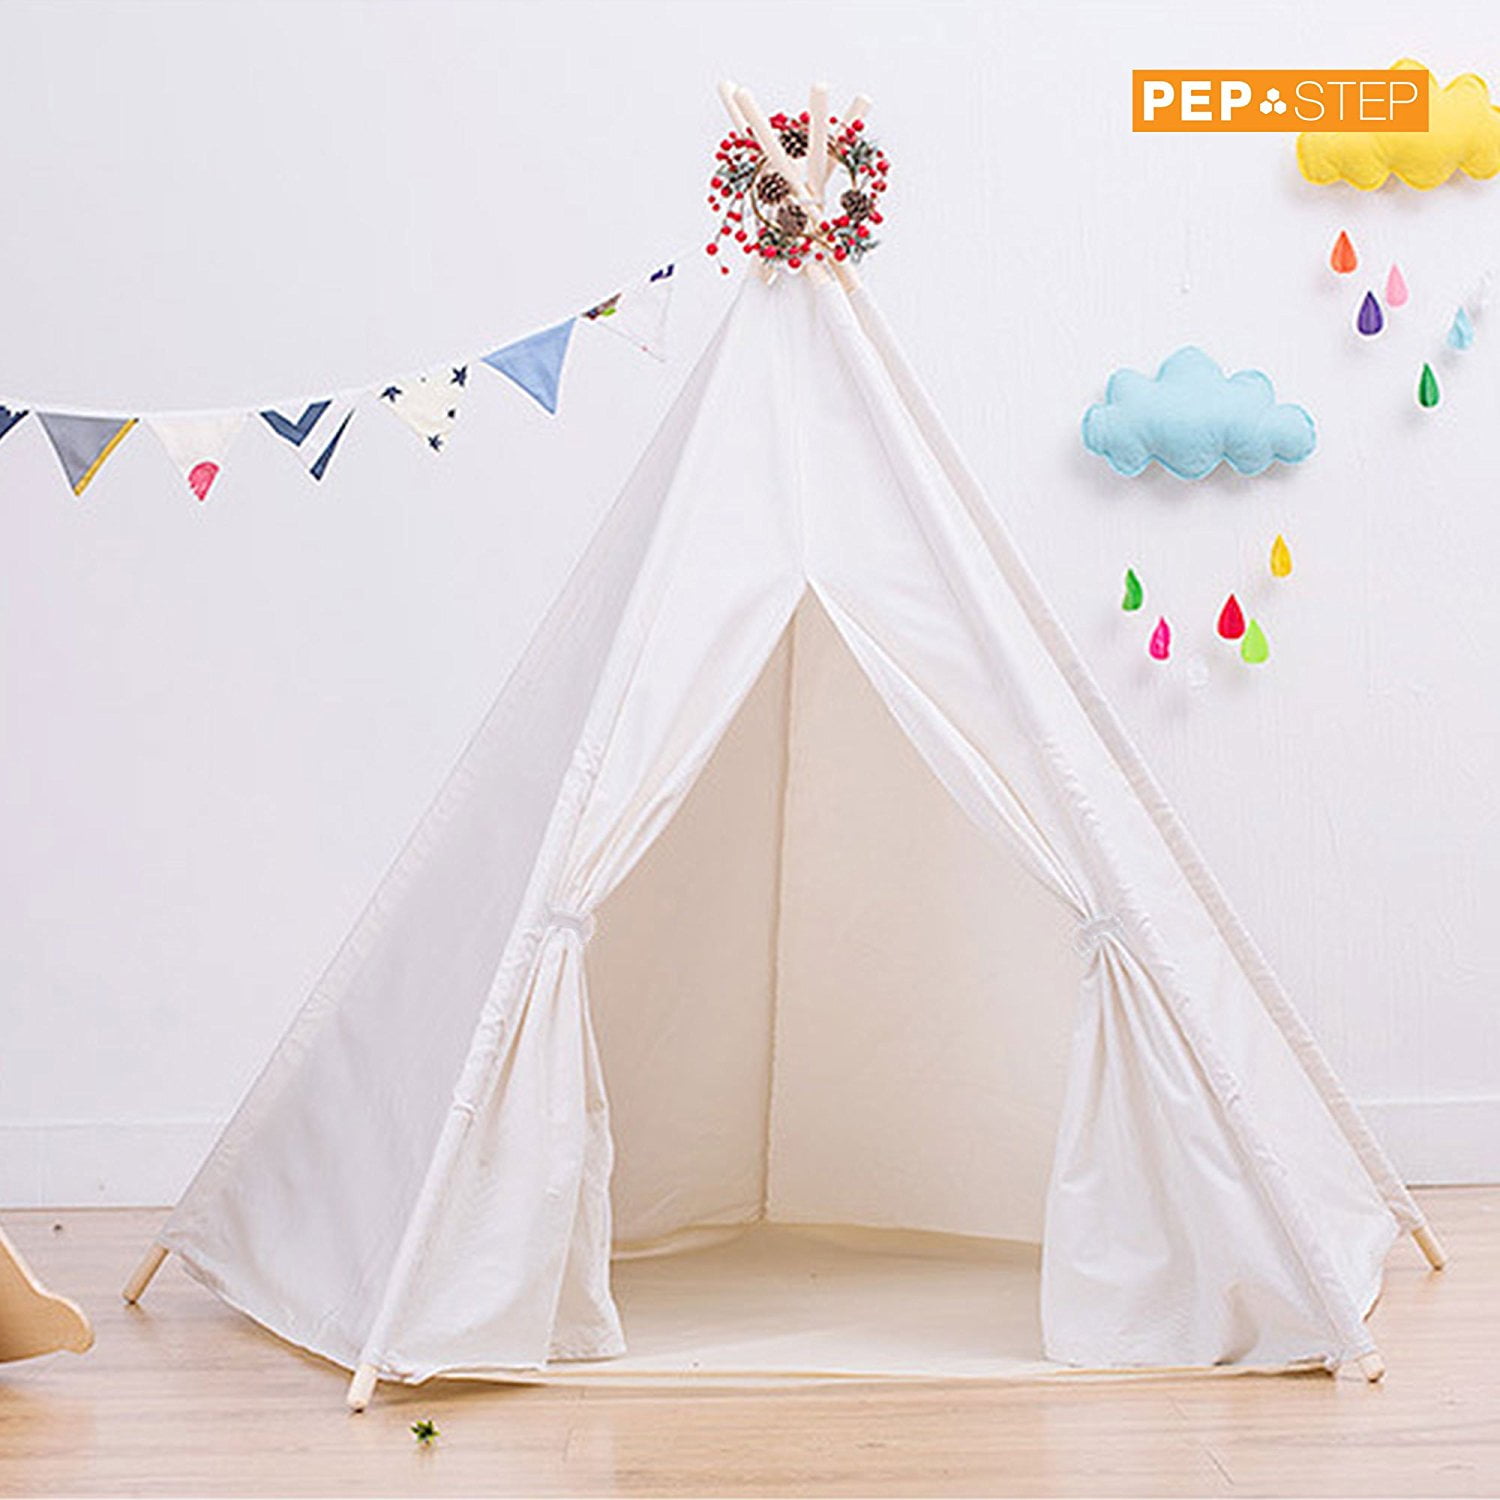 Free Fun Flags! Canicove Teepee Tent for Kids Award Winning 100% Cotton Play Tent Large Indoor/Outdoor Tipi for Boys & Girls 